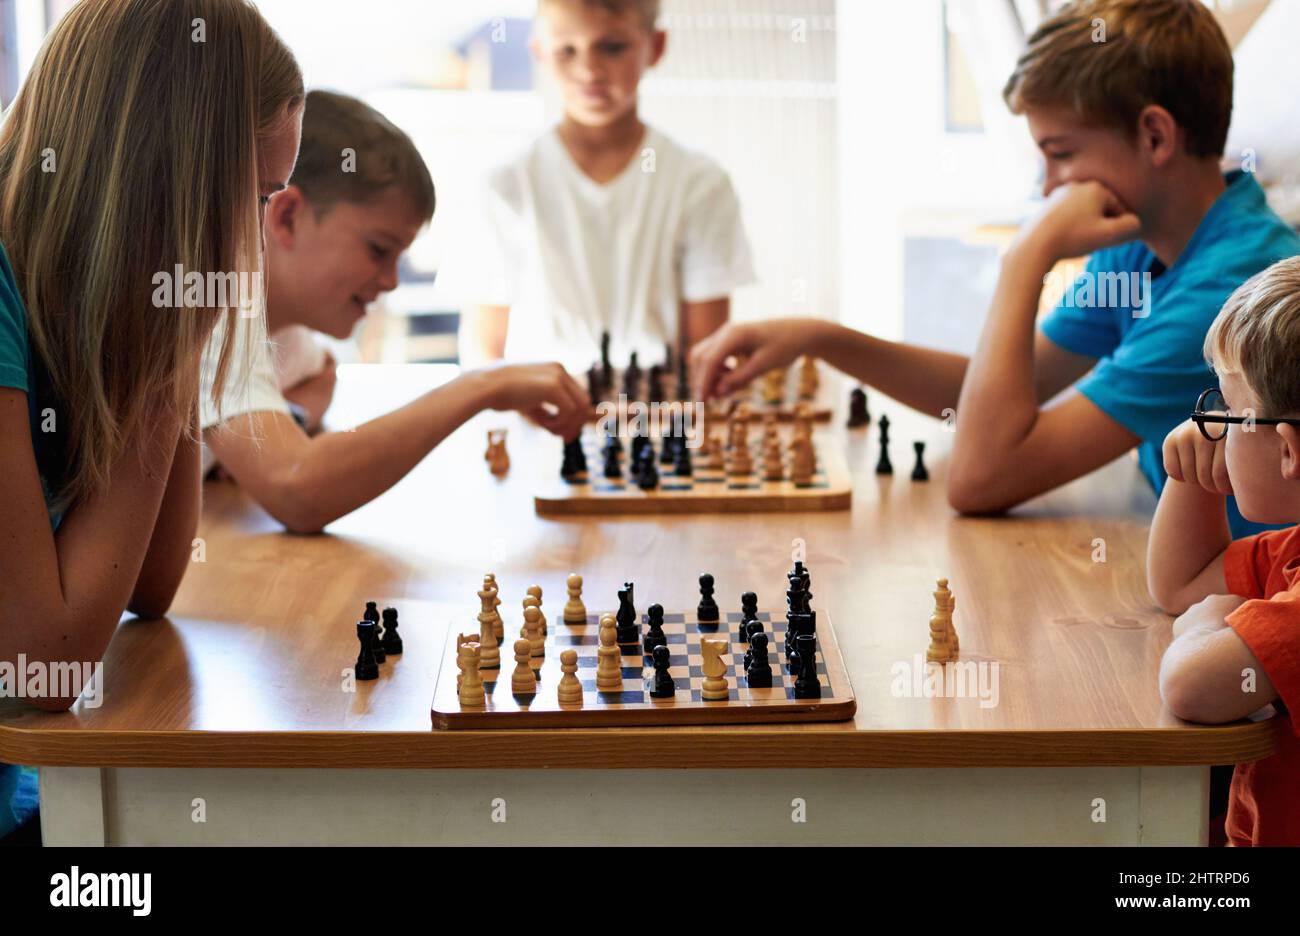 Chess champions. A group of kids playing chess. Stock Photo